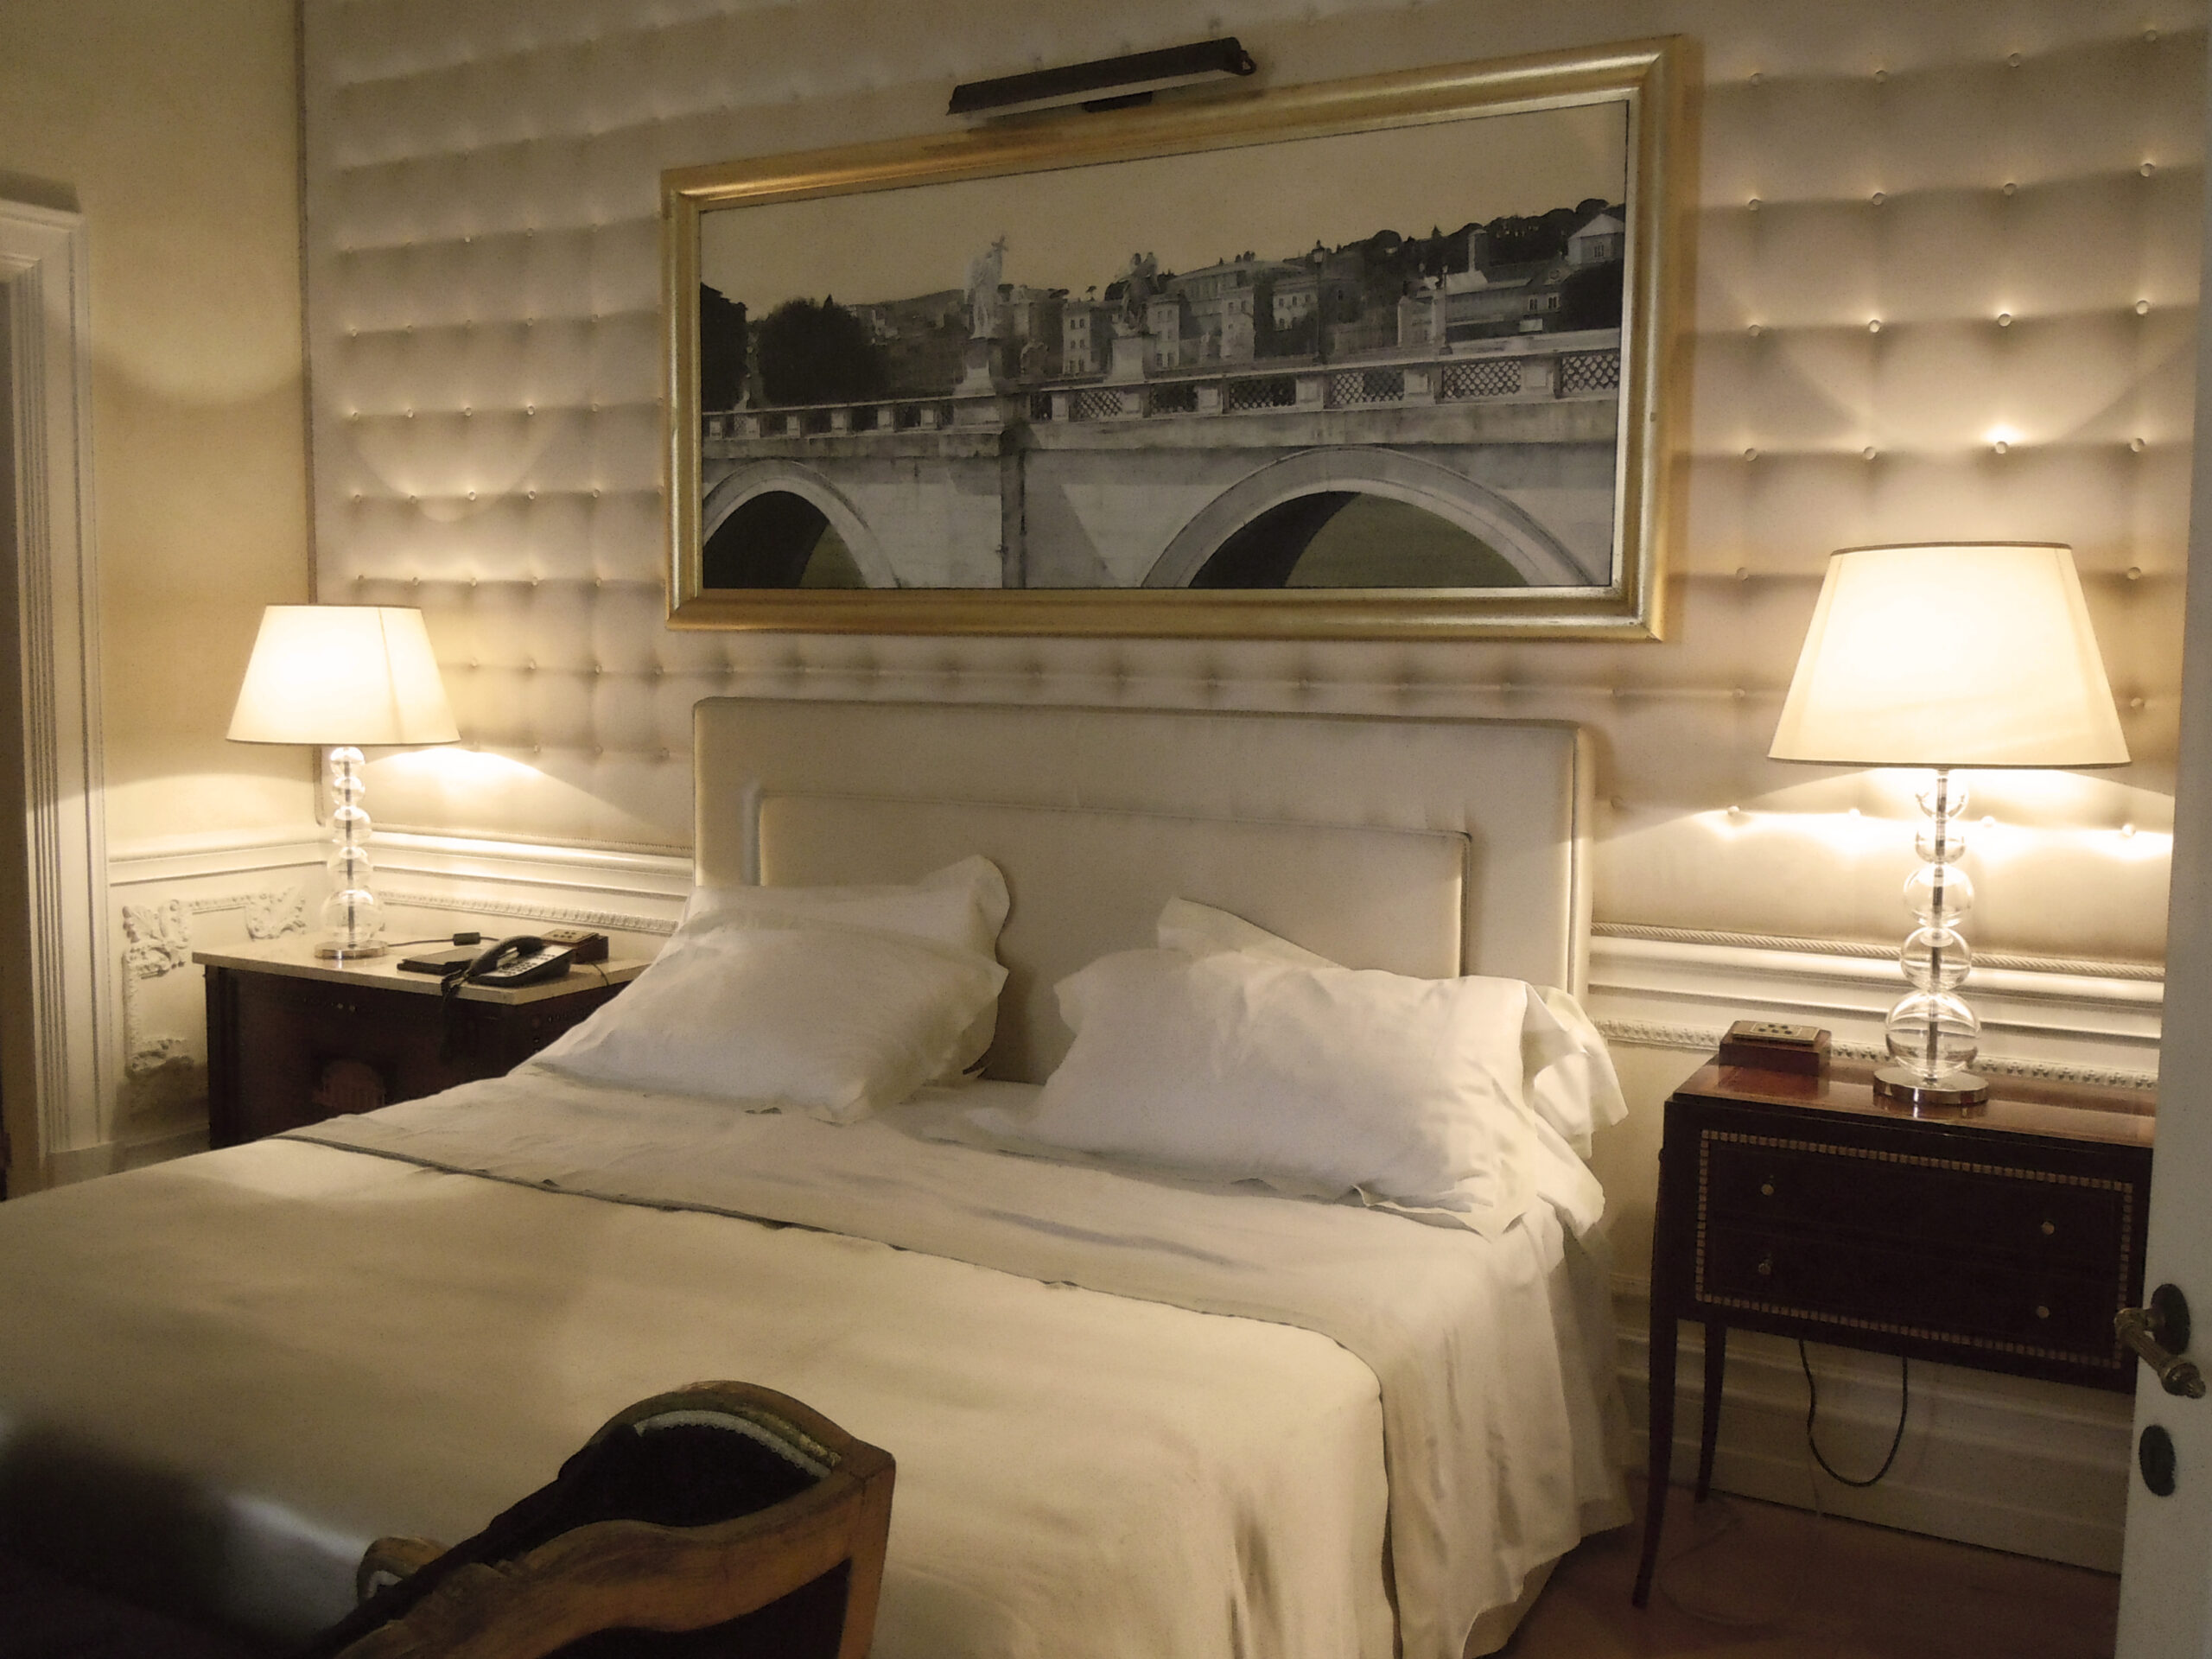 TO ROME WITH LOVE - Directed by Woody Allen - Int. Luca’s Hotel Room - ©2012 - Sony Pictures